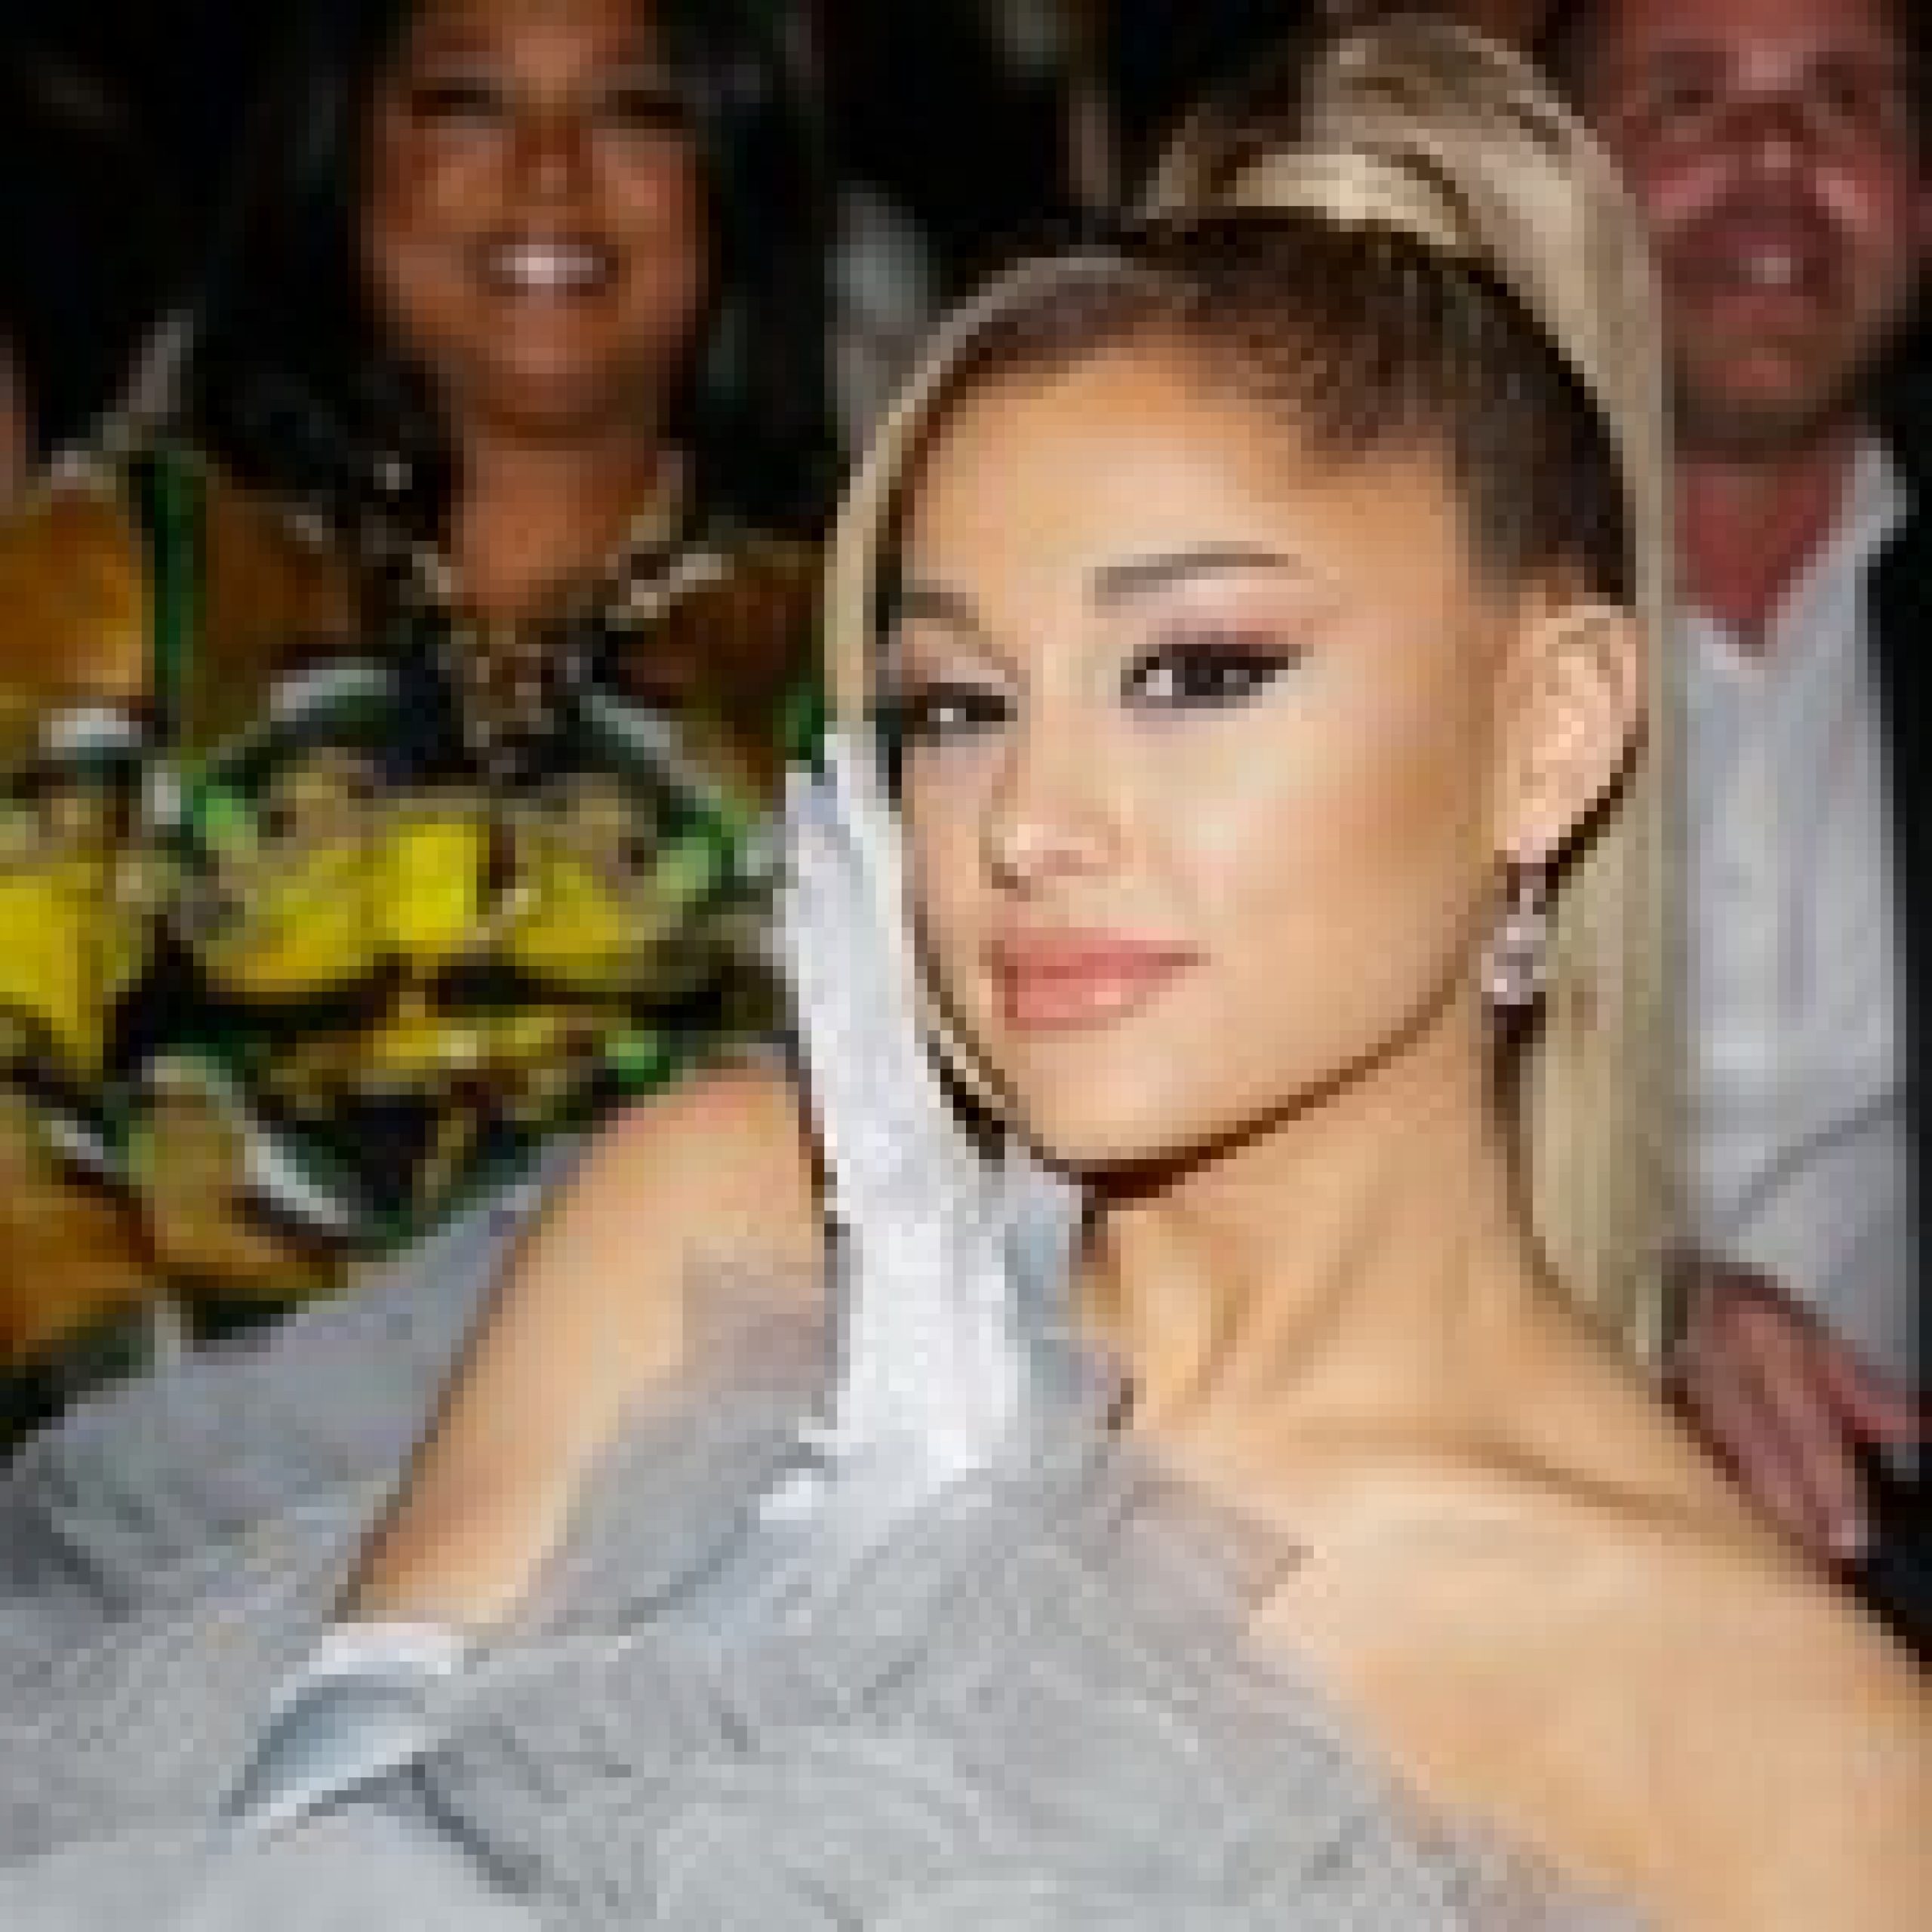 Ariana Grande Reacts to Selena Gomez Singing ‘Break Up With Your Girlfriend, I’m Bored’